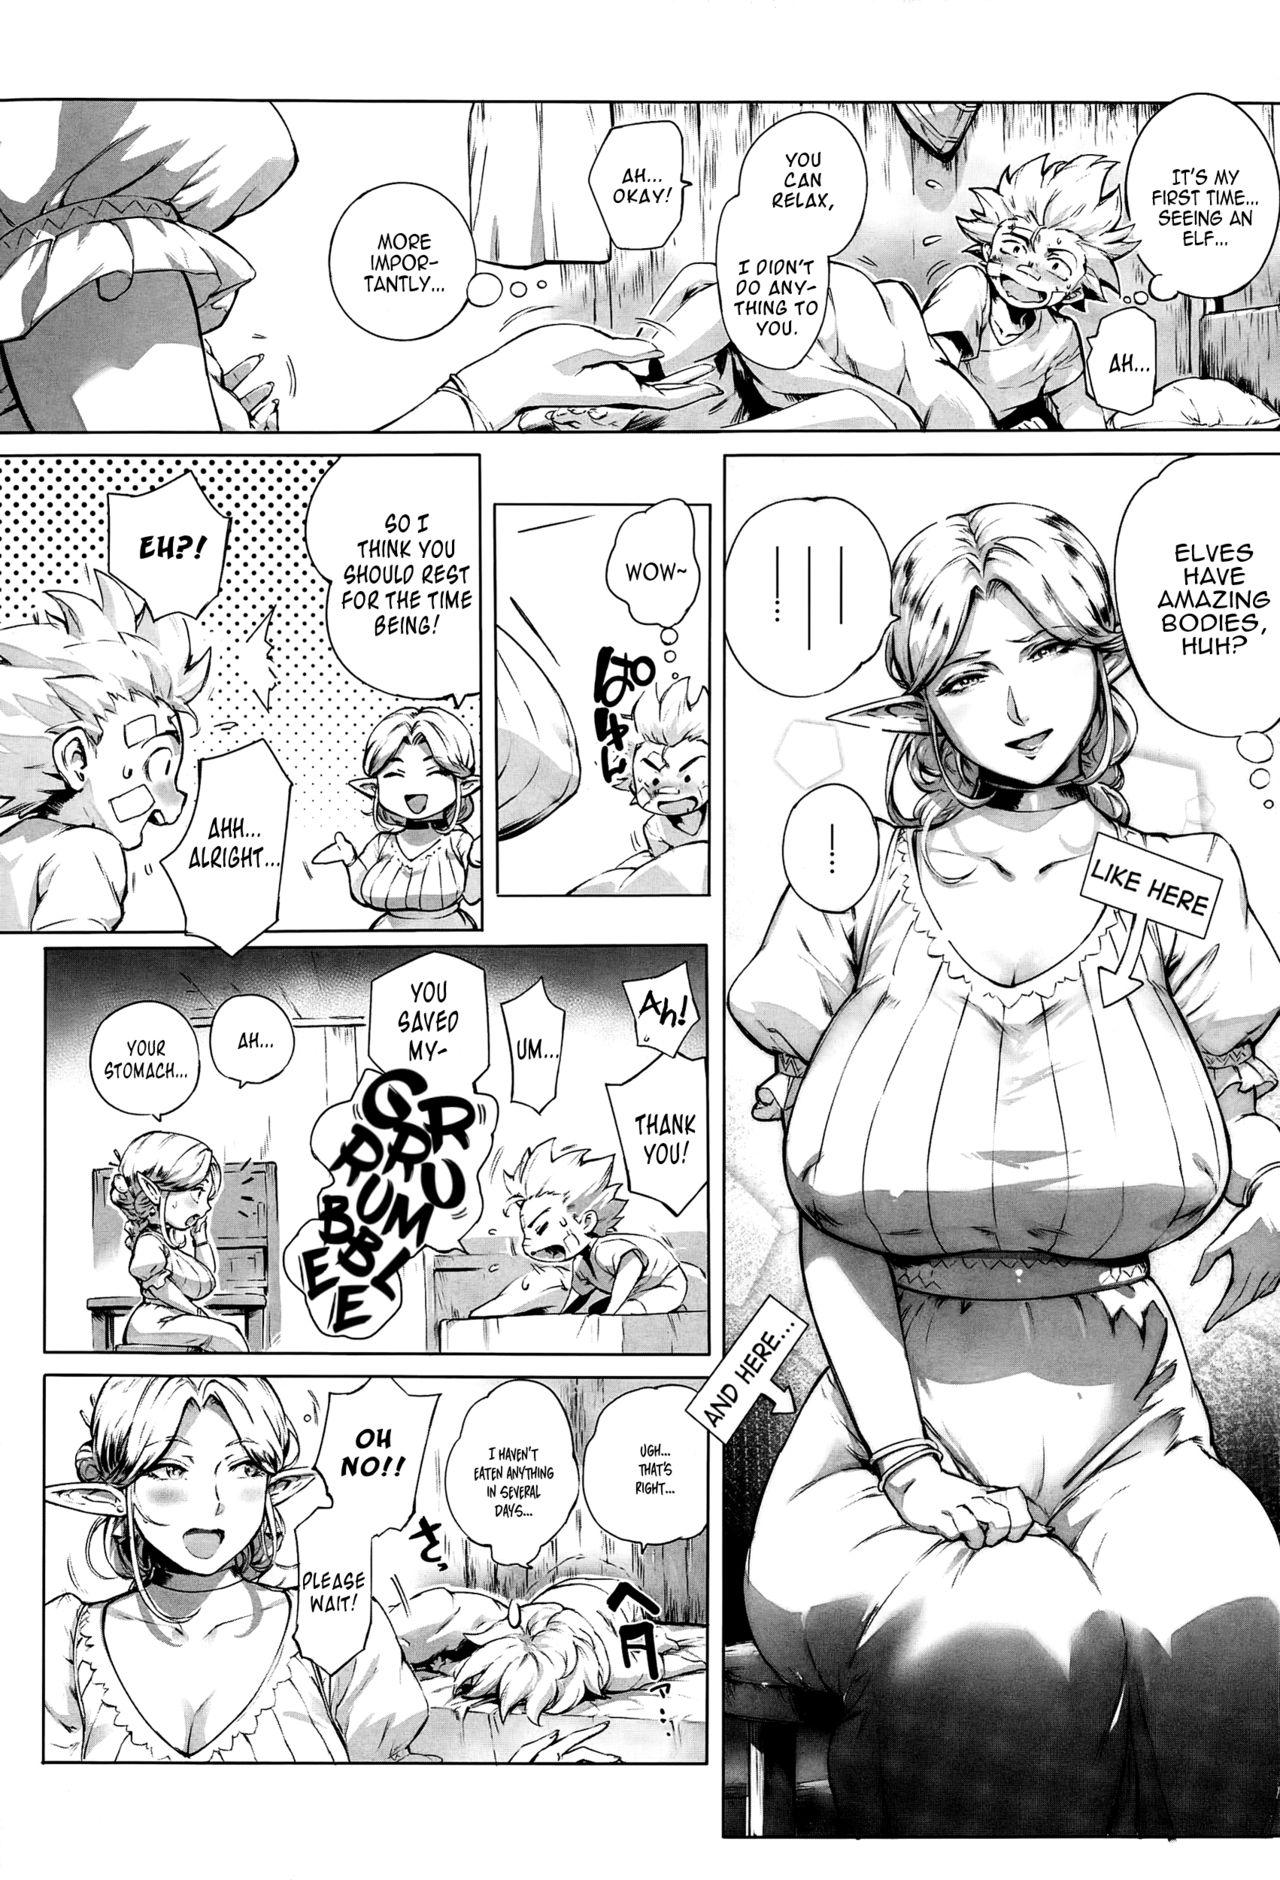 Moneytalks Koko ga Tanetsuke Frontier | This Is The Mating Frontier! Ch. 1-2 Foot - Page 3